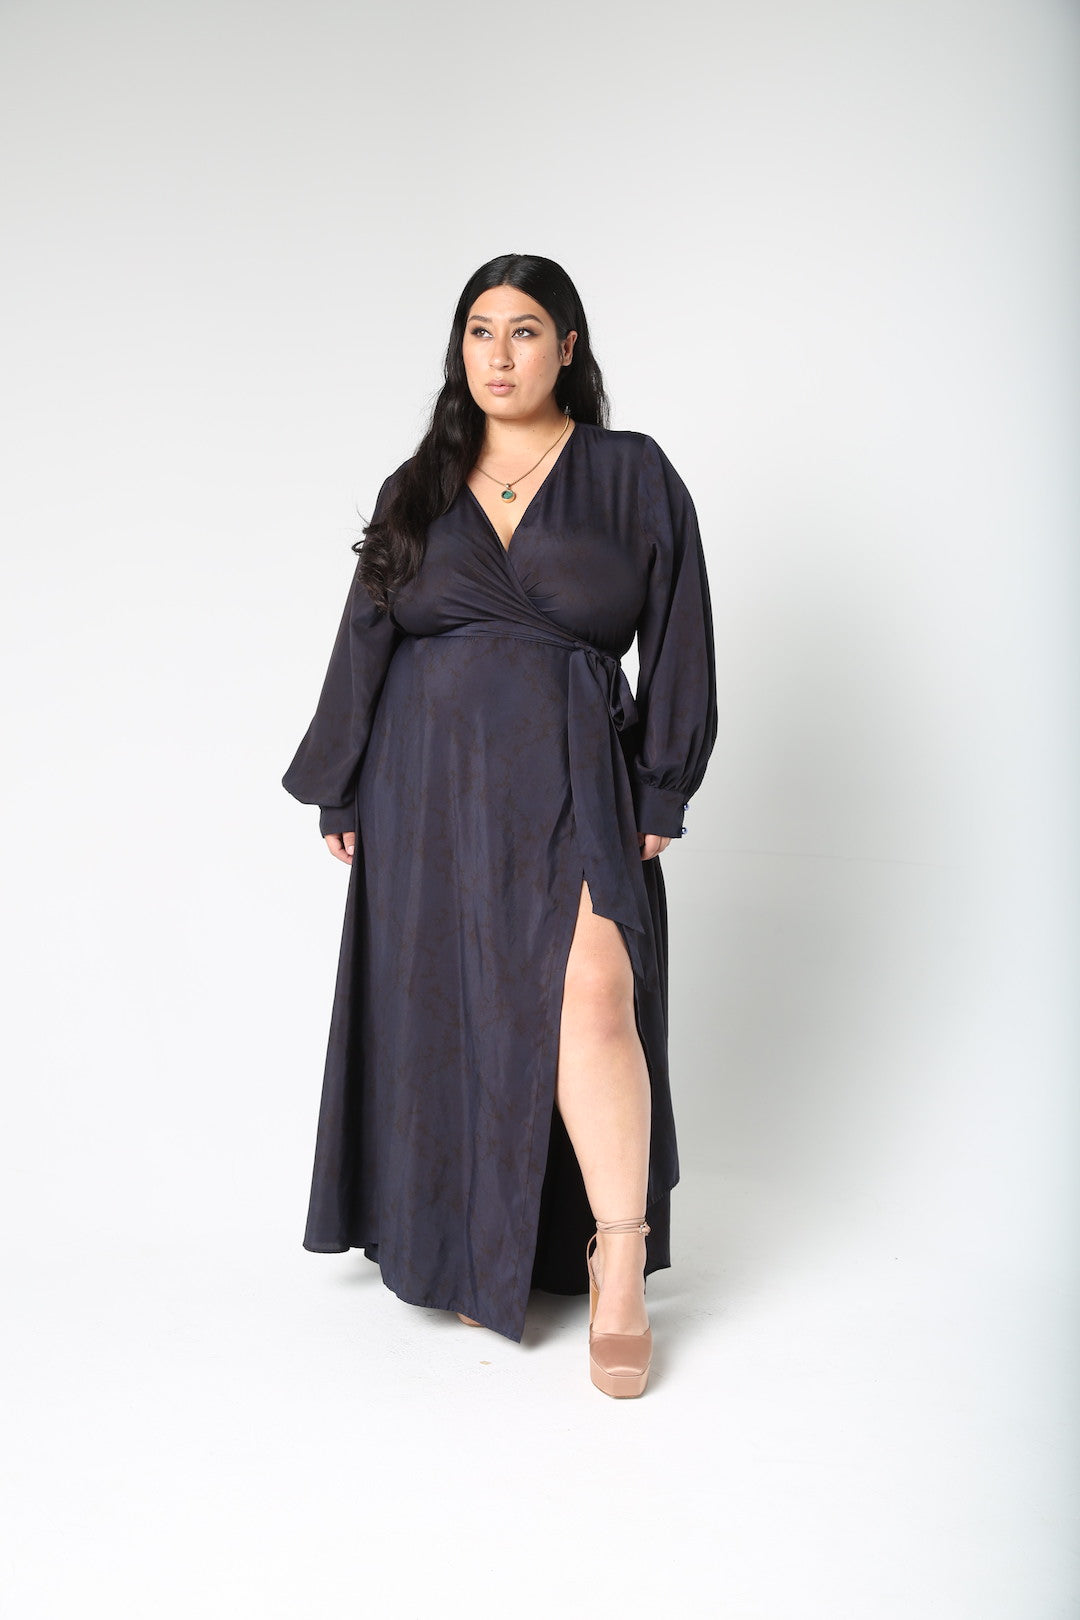 Our best-selling now classic maxi wrap dress! This one is washed and over-dyed with an ink-blue color.  A faint floral print shows through Ink blue giving this dress a very unique look. Designed to fit the true size majority - sizes 10-22+